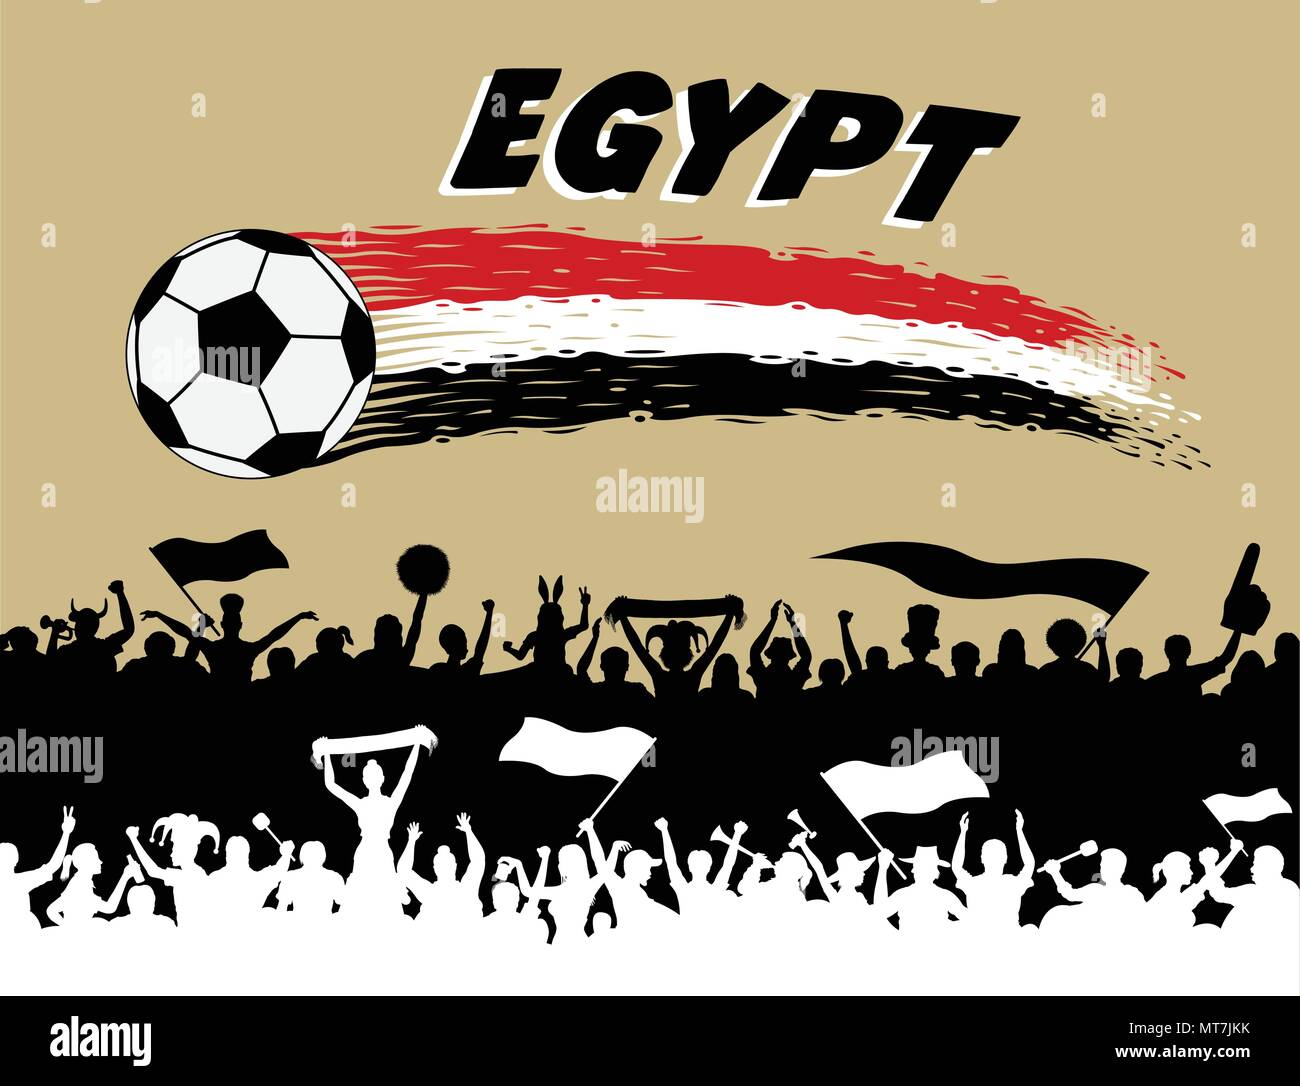 Egypt flag colors with soccer ball and Egyptian supporters silhouettes. All the objects, brush strokes and silhouettes are in different layers and the Stock Vector